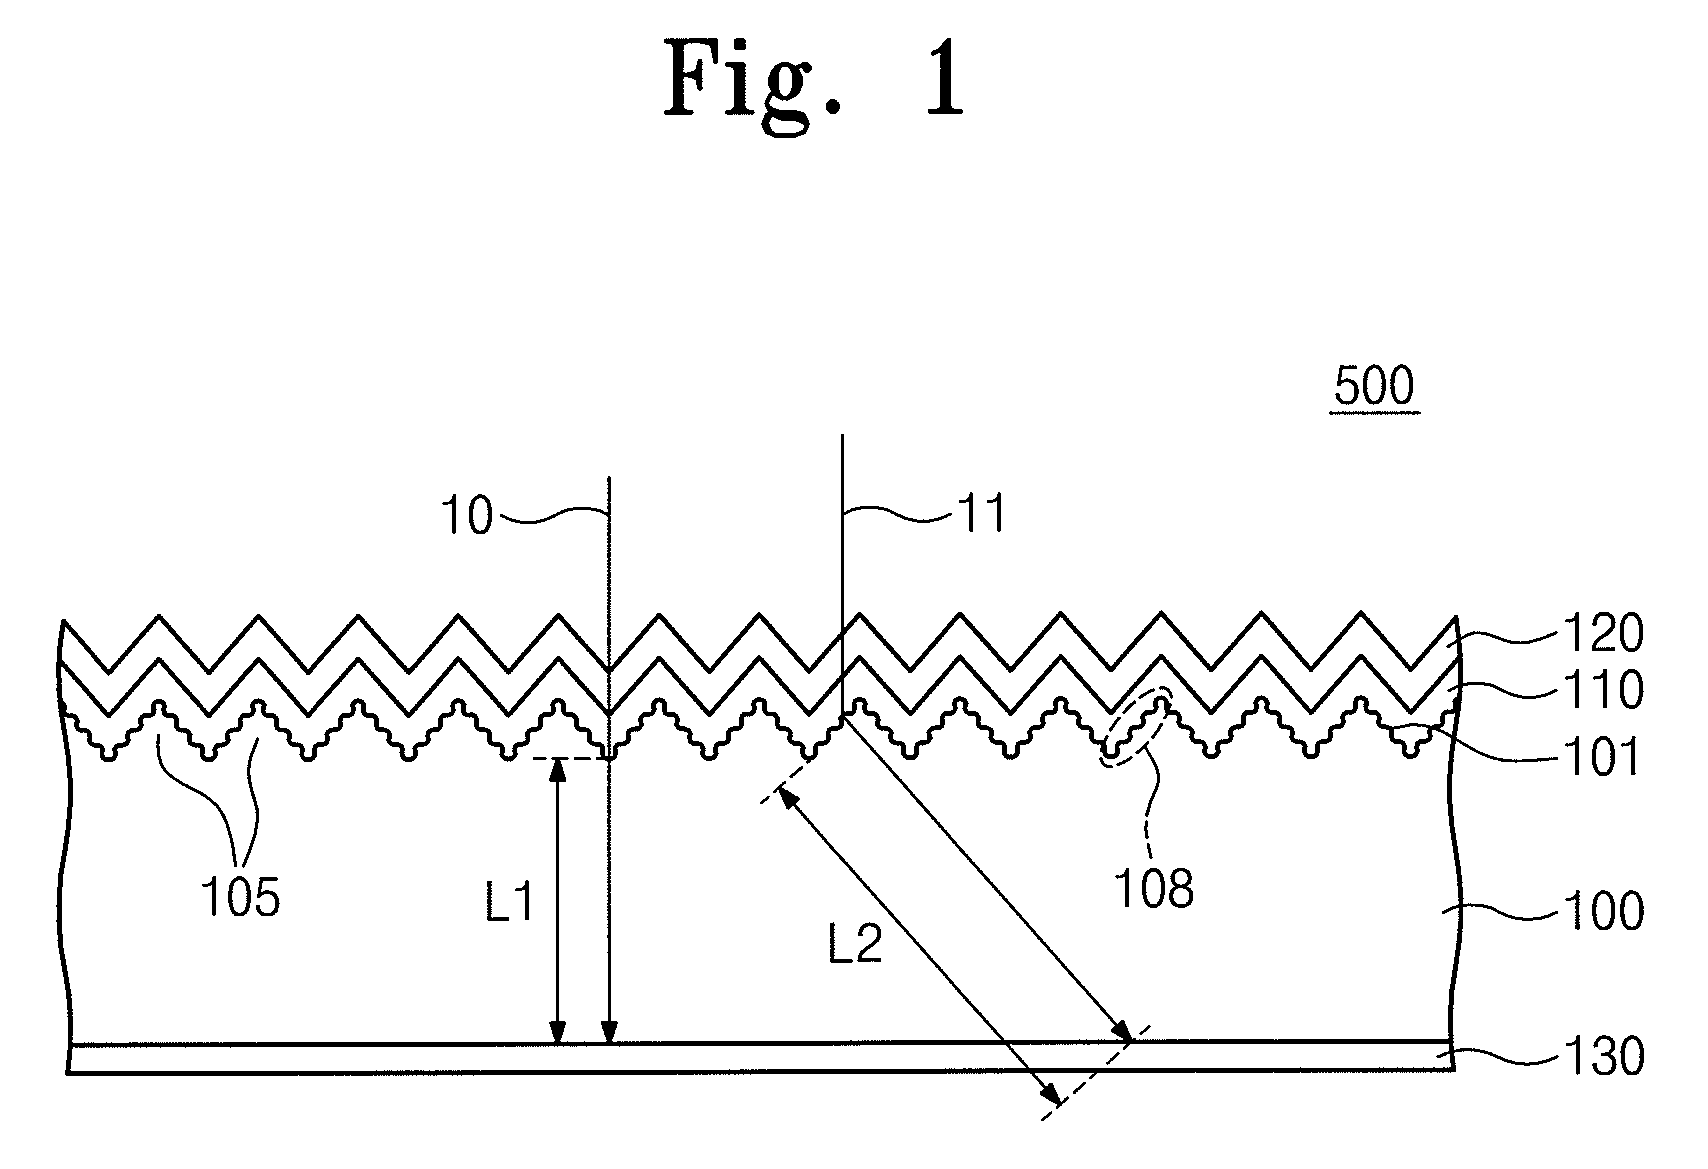 Photovoltaic device and method of manufacturing the same